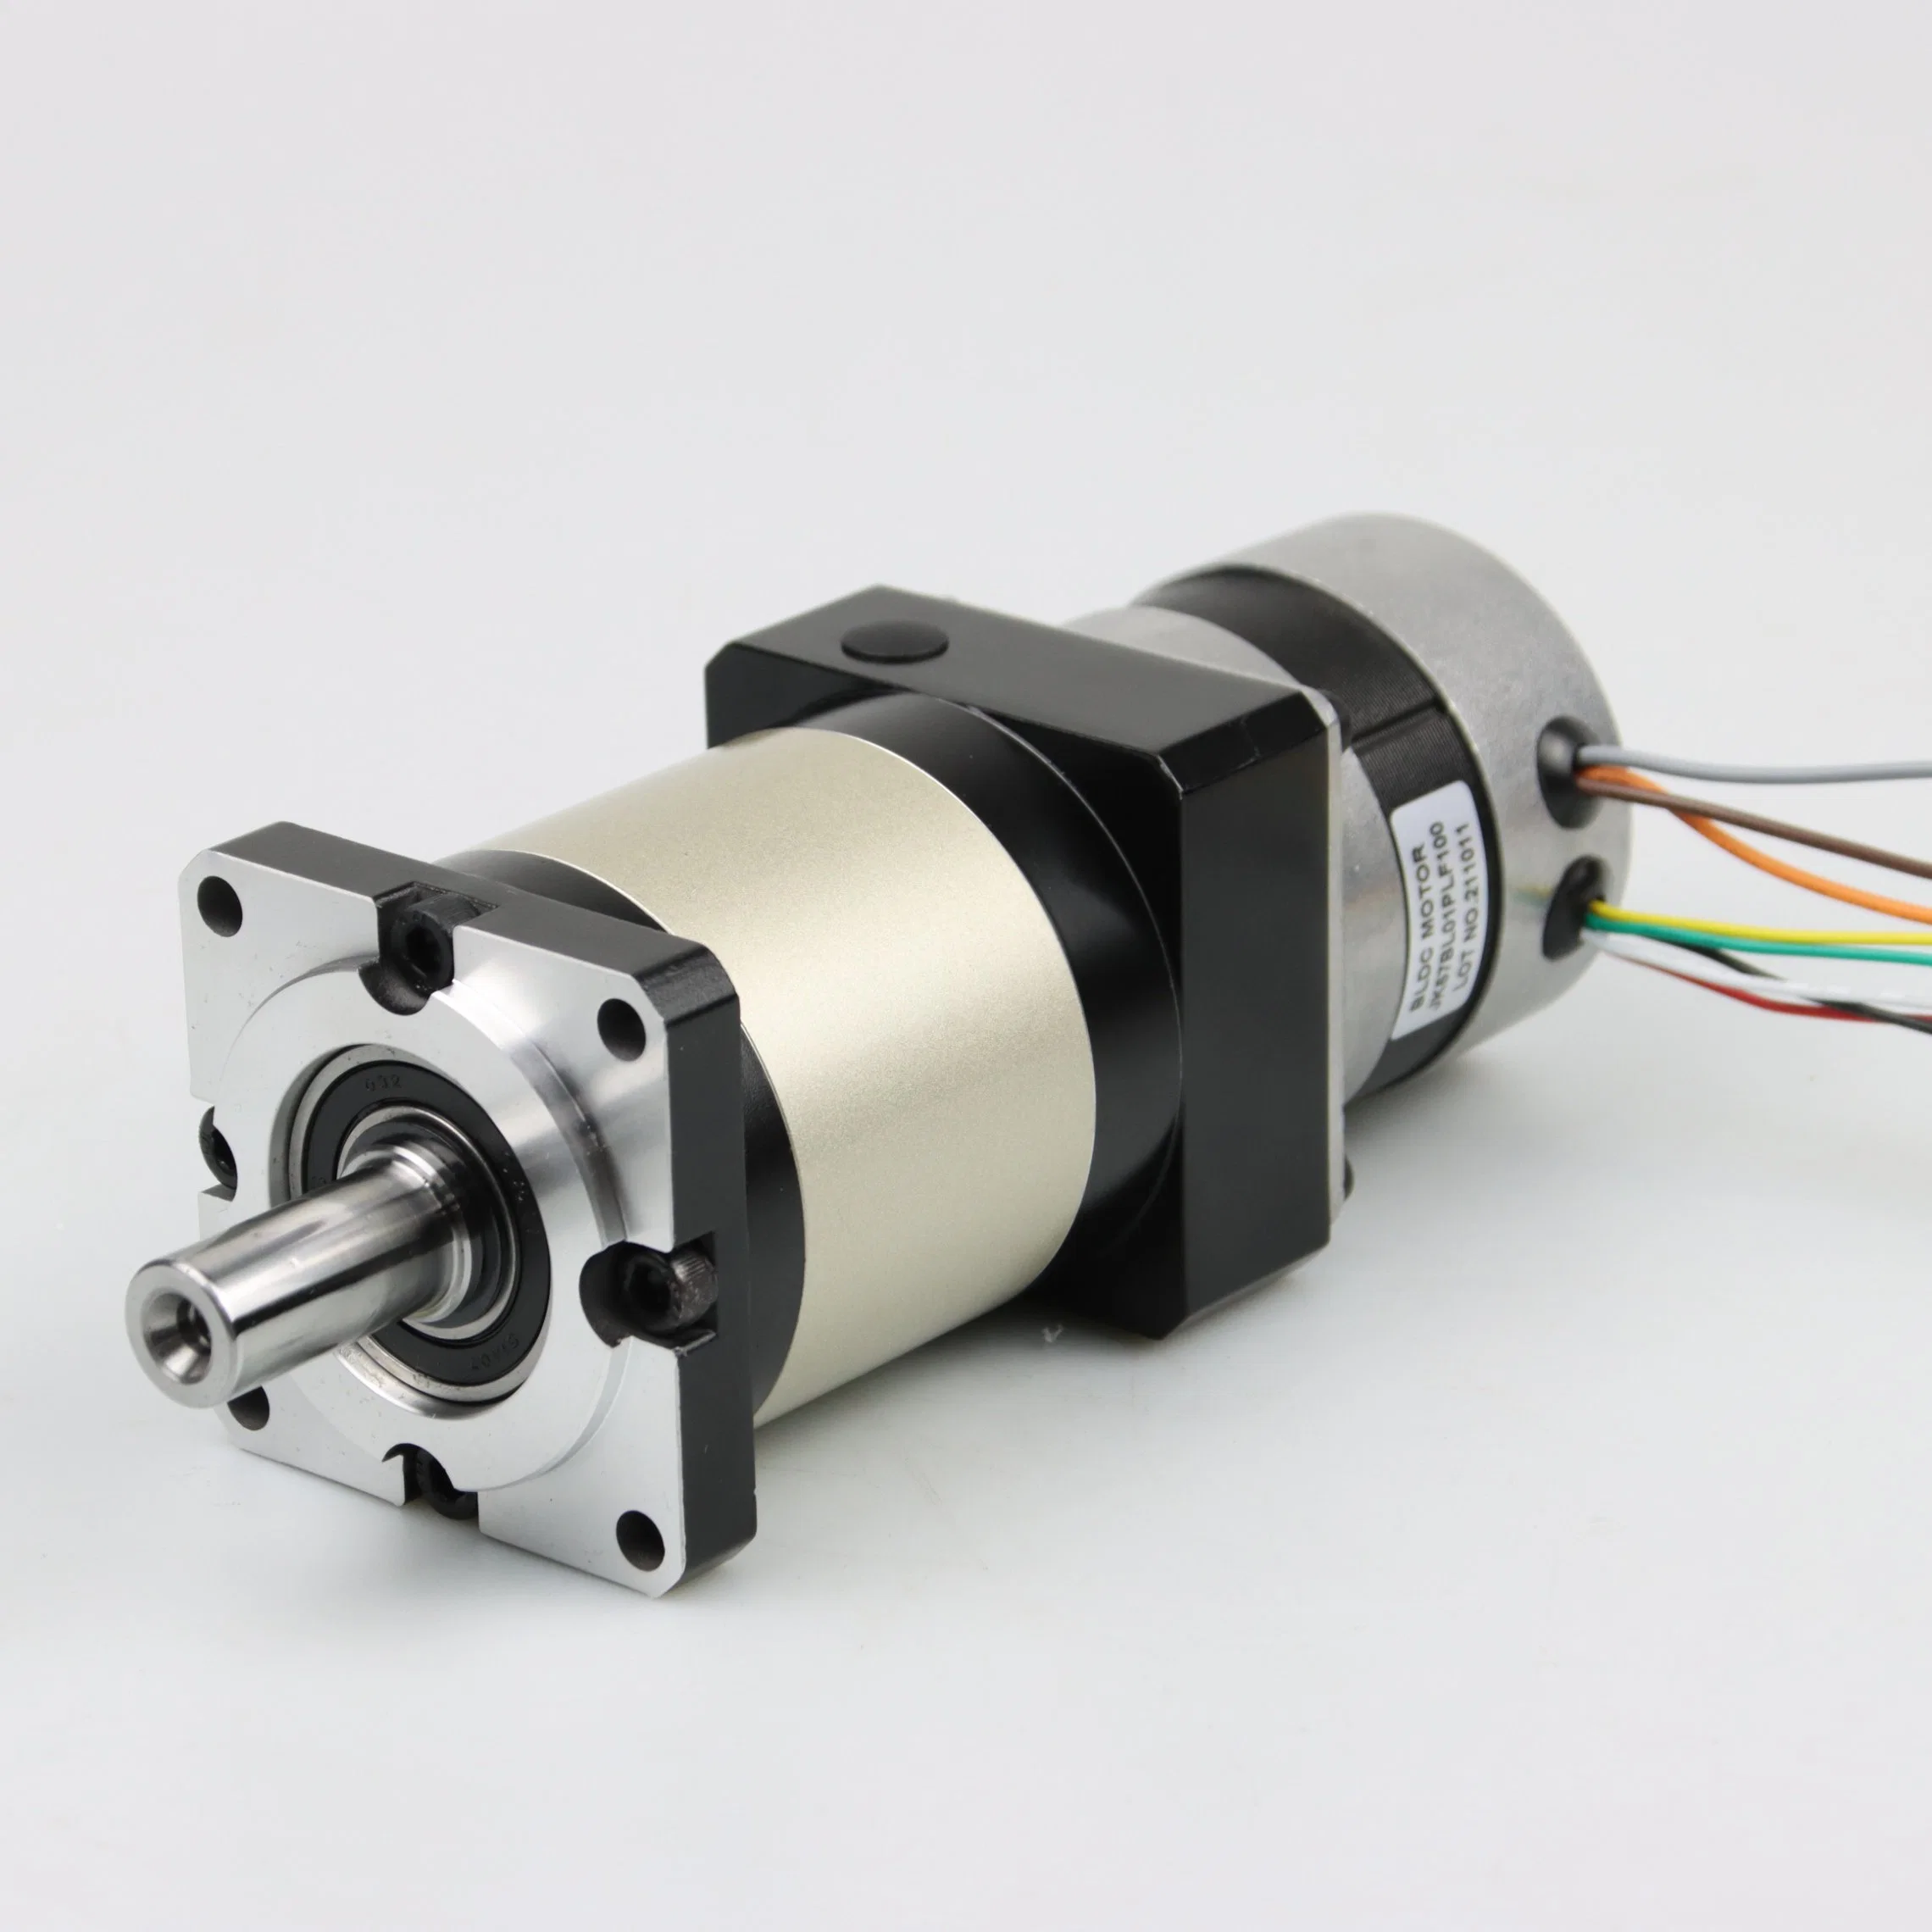 NEMA23 57mm BLDC Brushless DC Motor 2500rpm 28.8W with Gearbox 1: 100 High Holding Torque